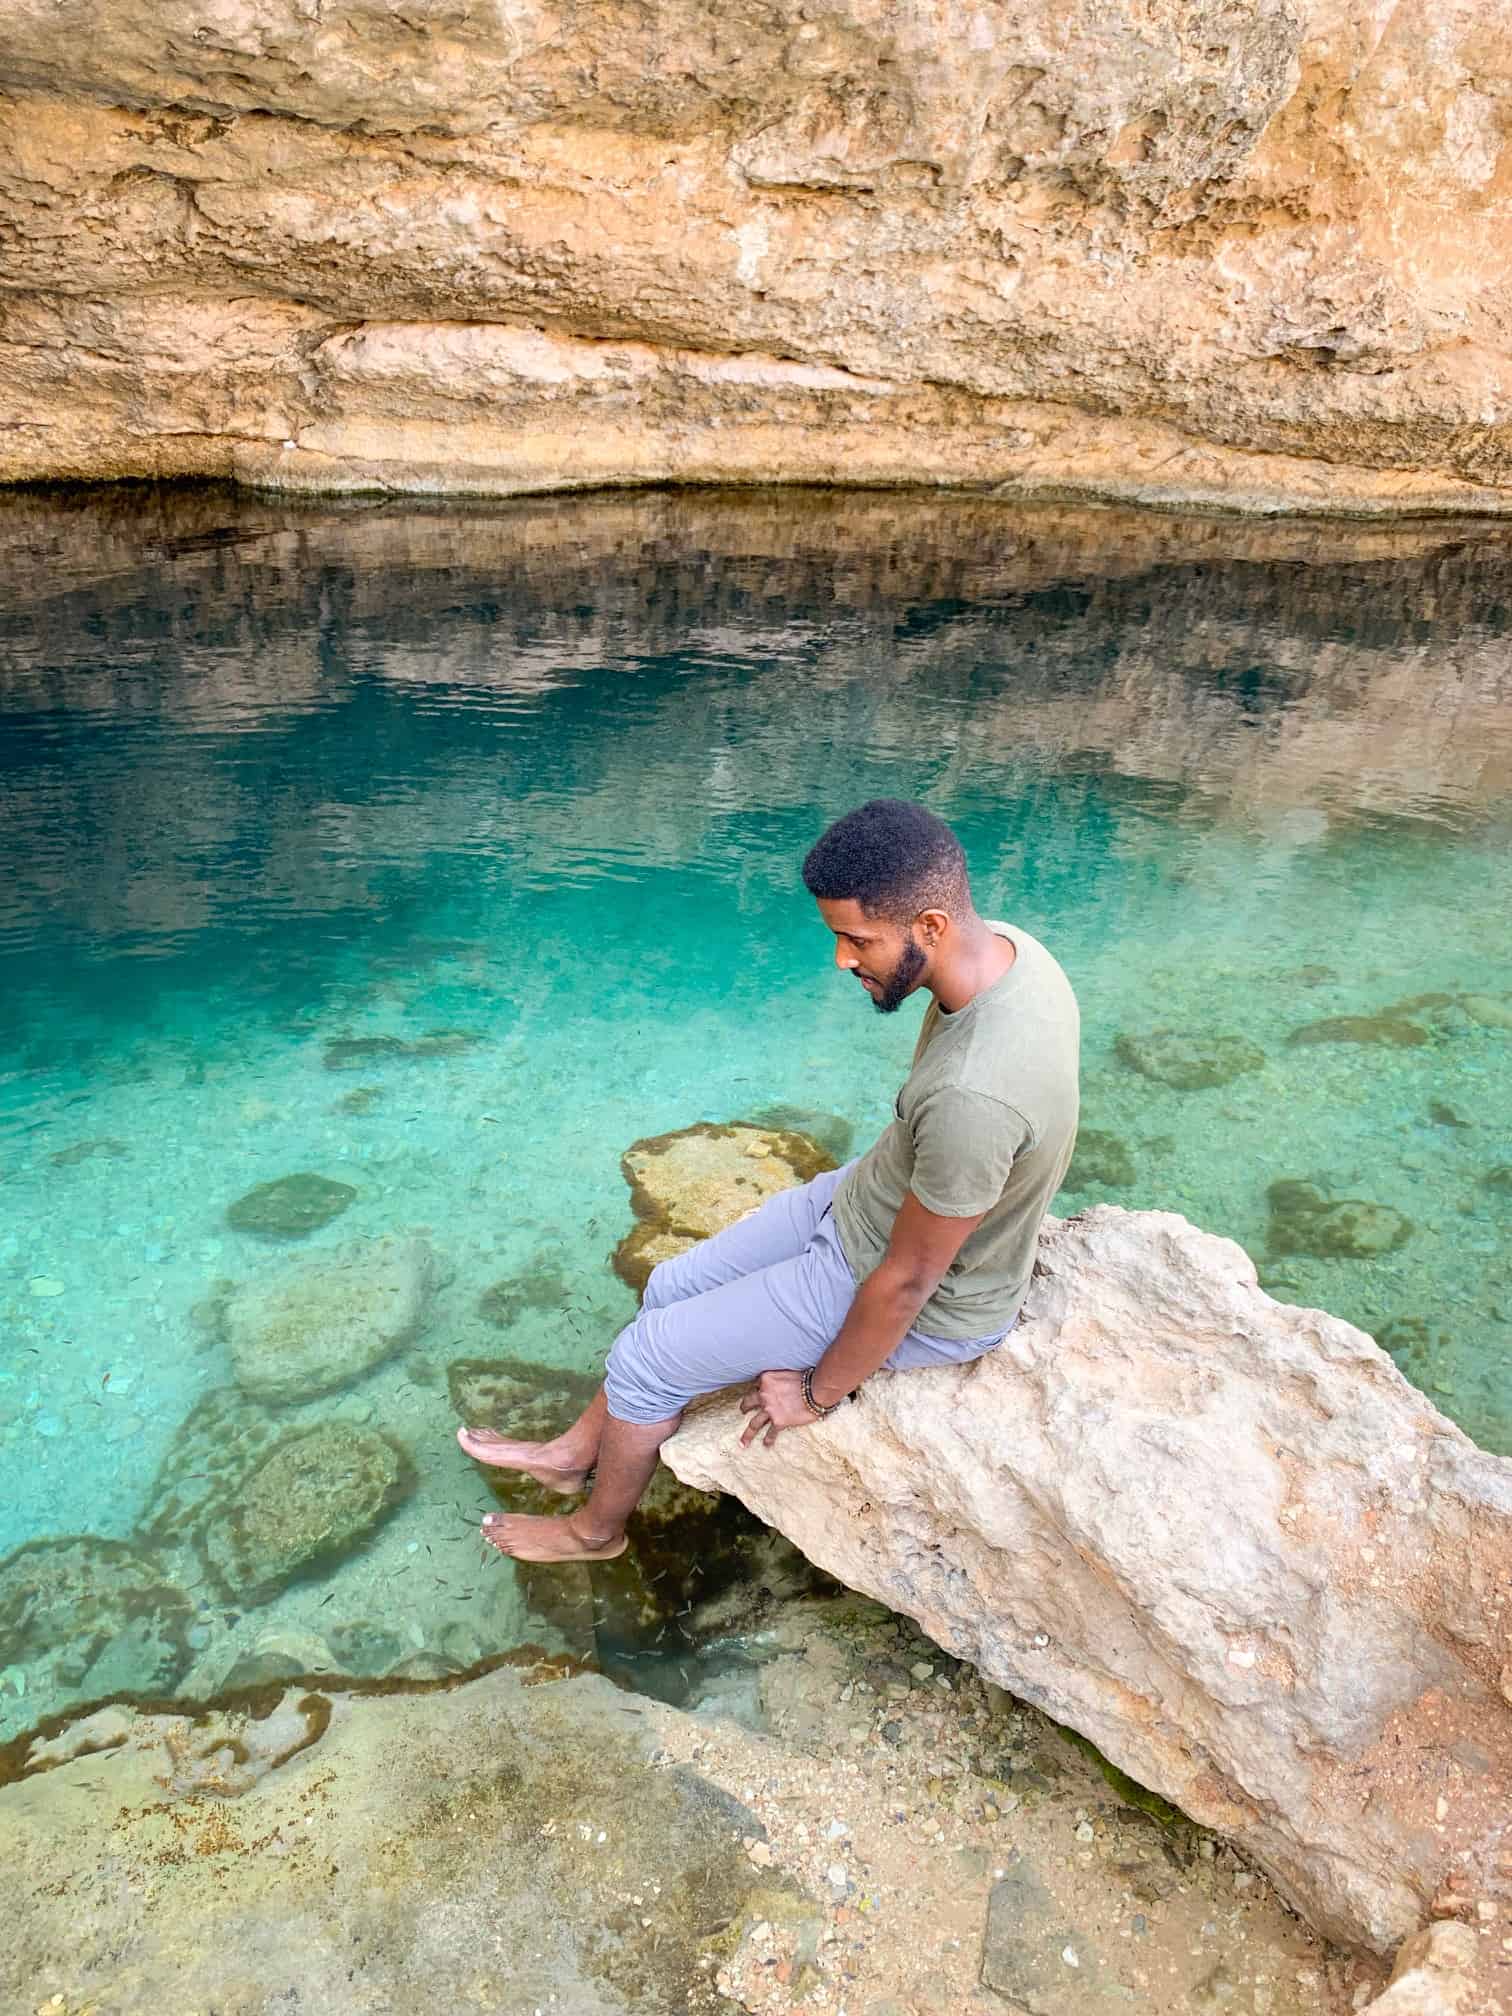 Get A Spa Treatment At Bimmah Sinkhole For One Of The Best Free Things To Do In Oman 